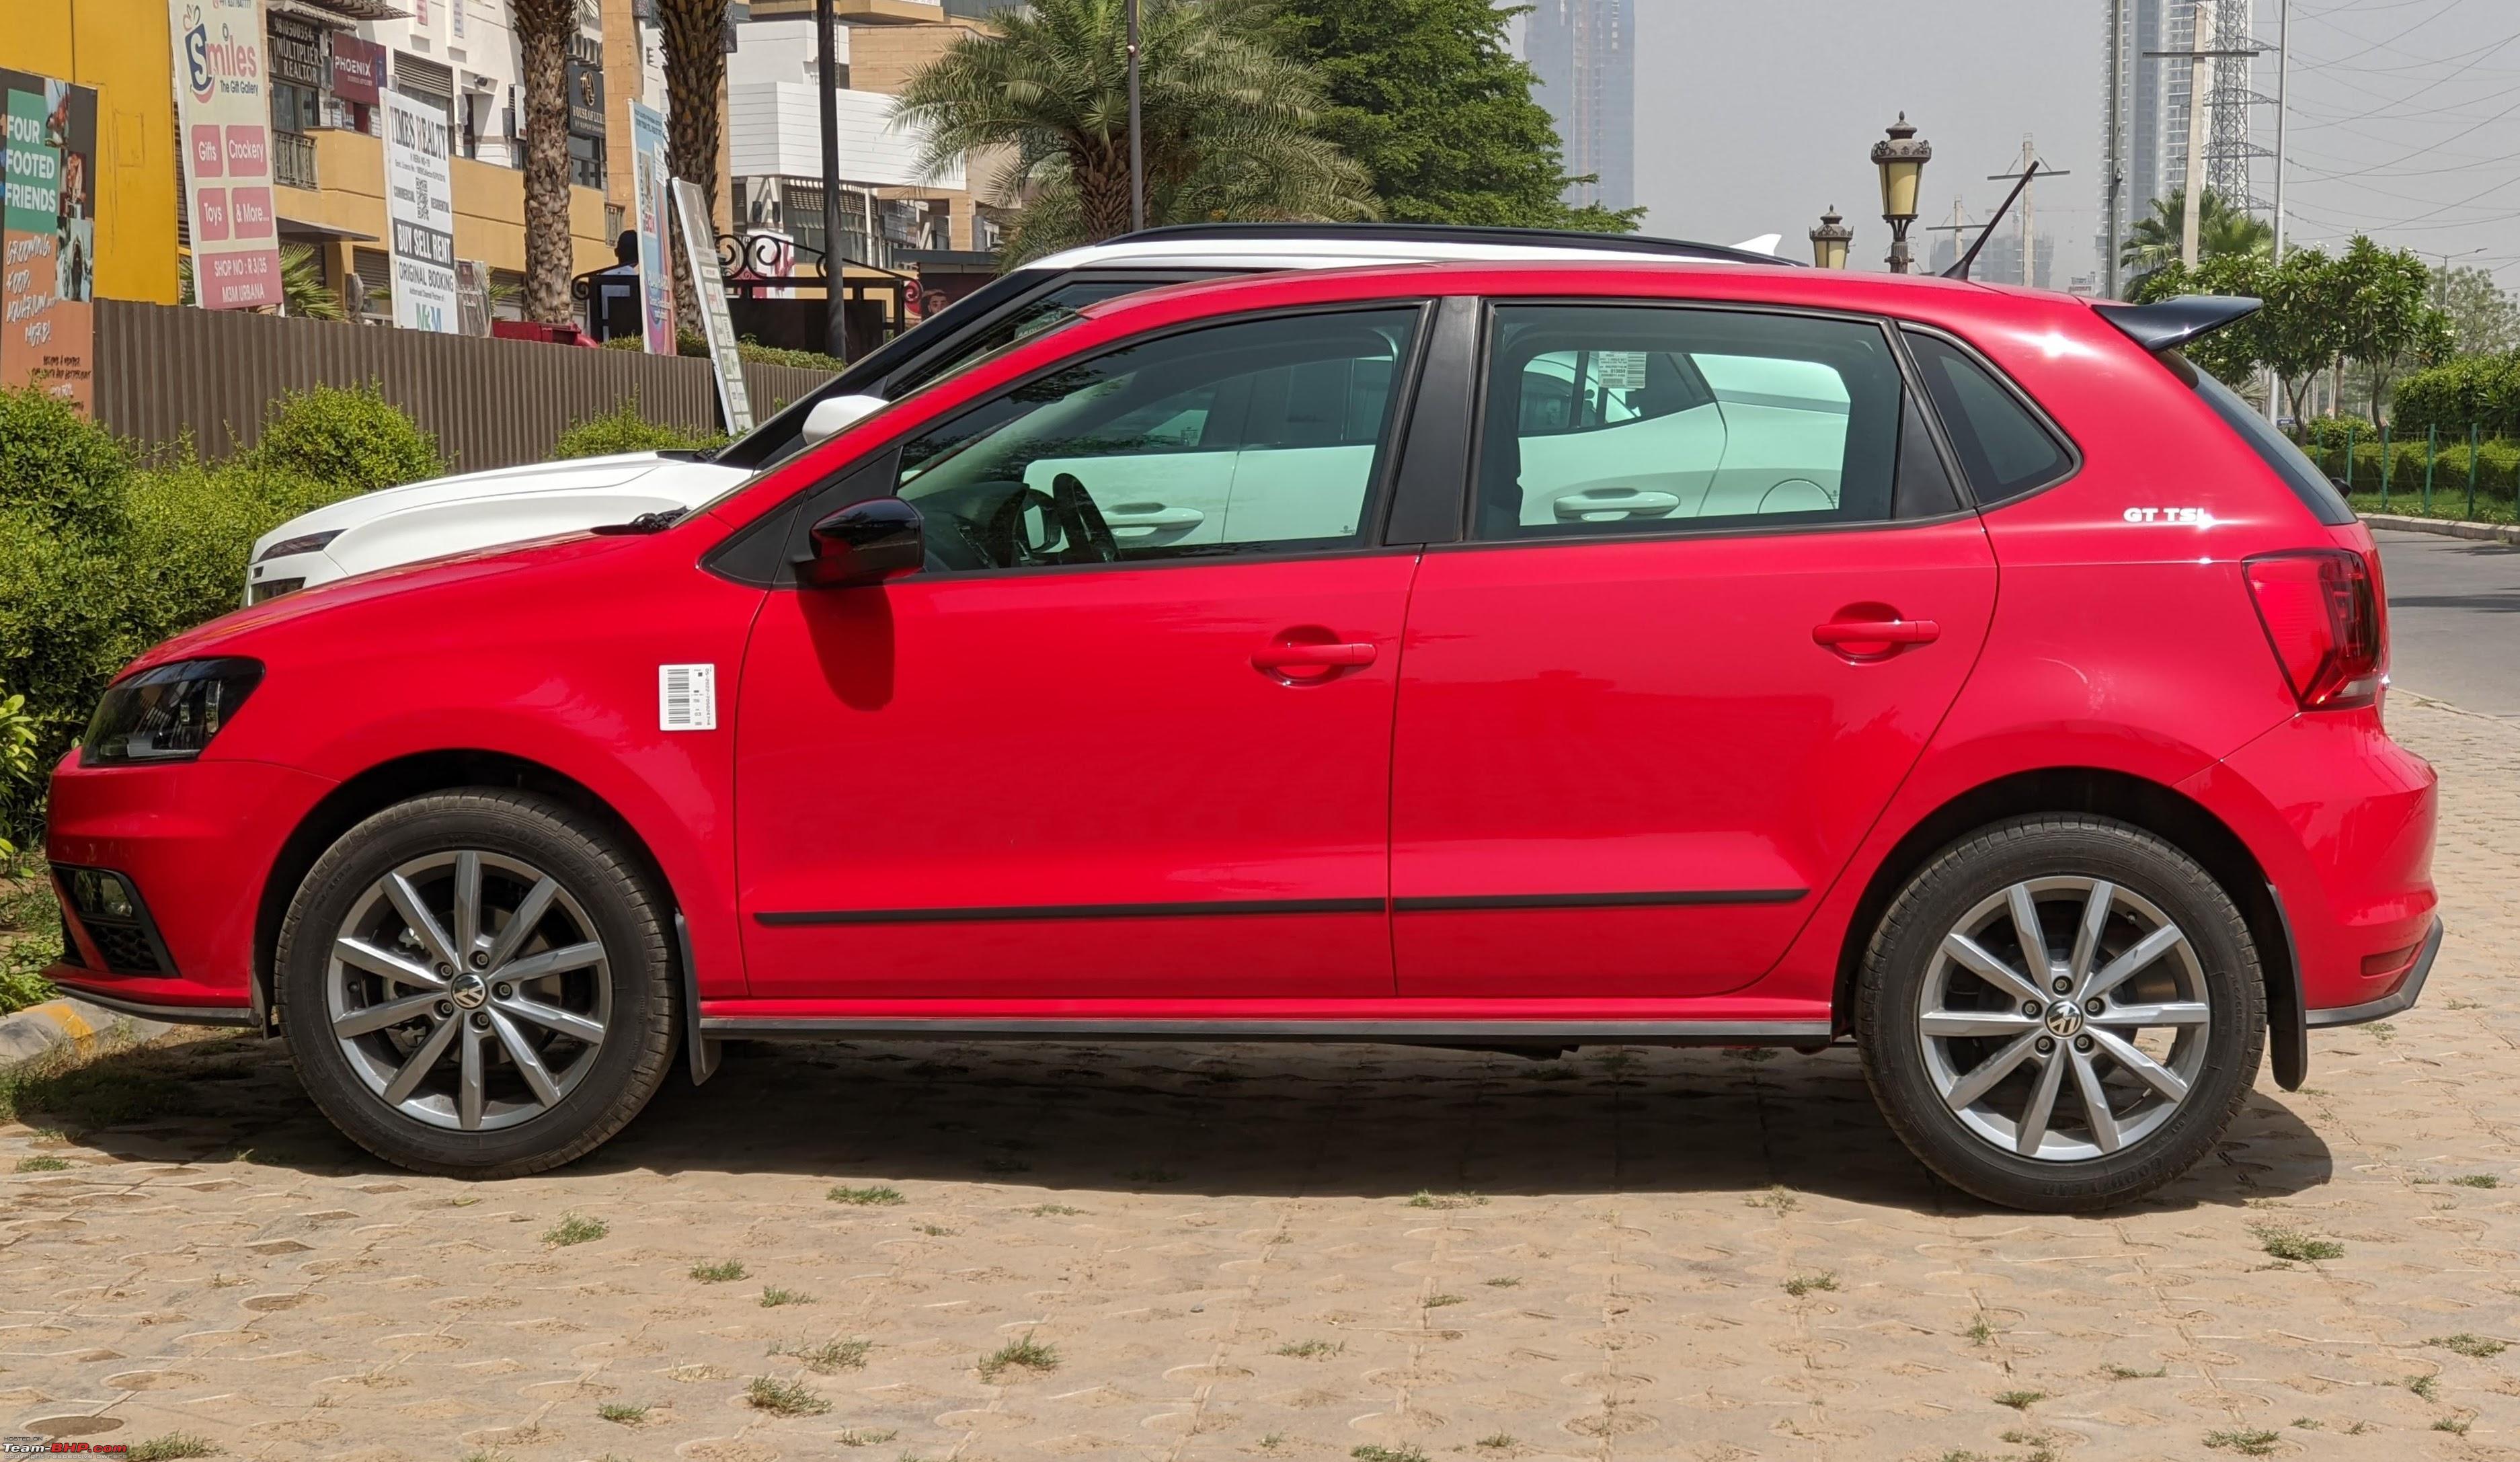 Volkswagen Polo 1.0L TSI : Official Review - Page 51 - Team-BHP